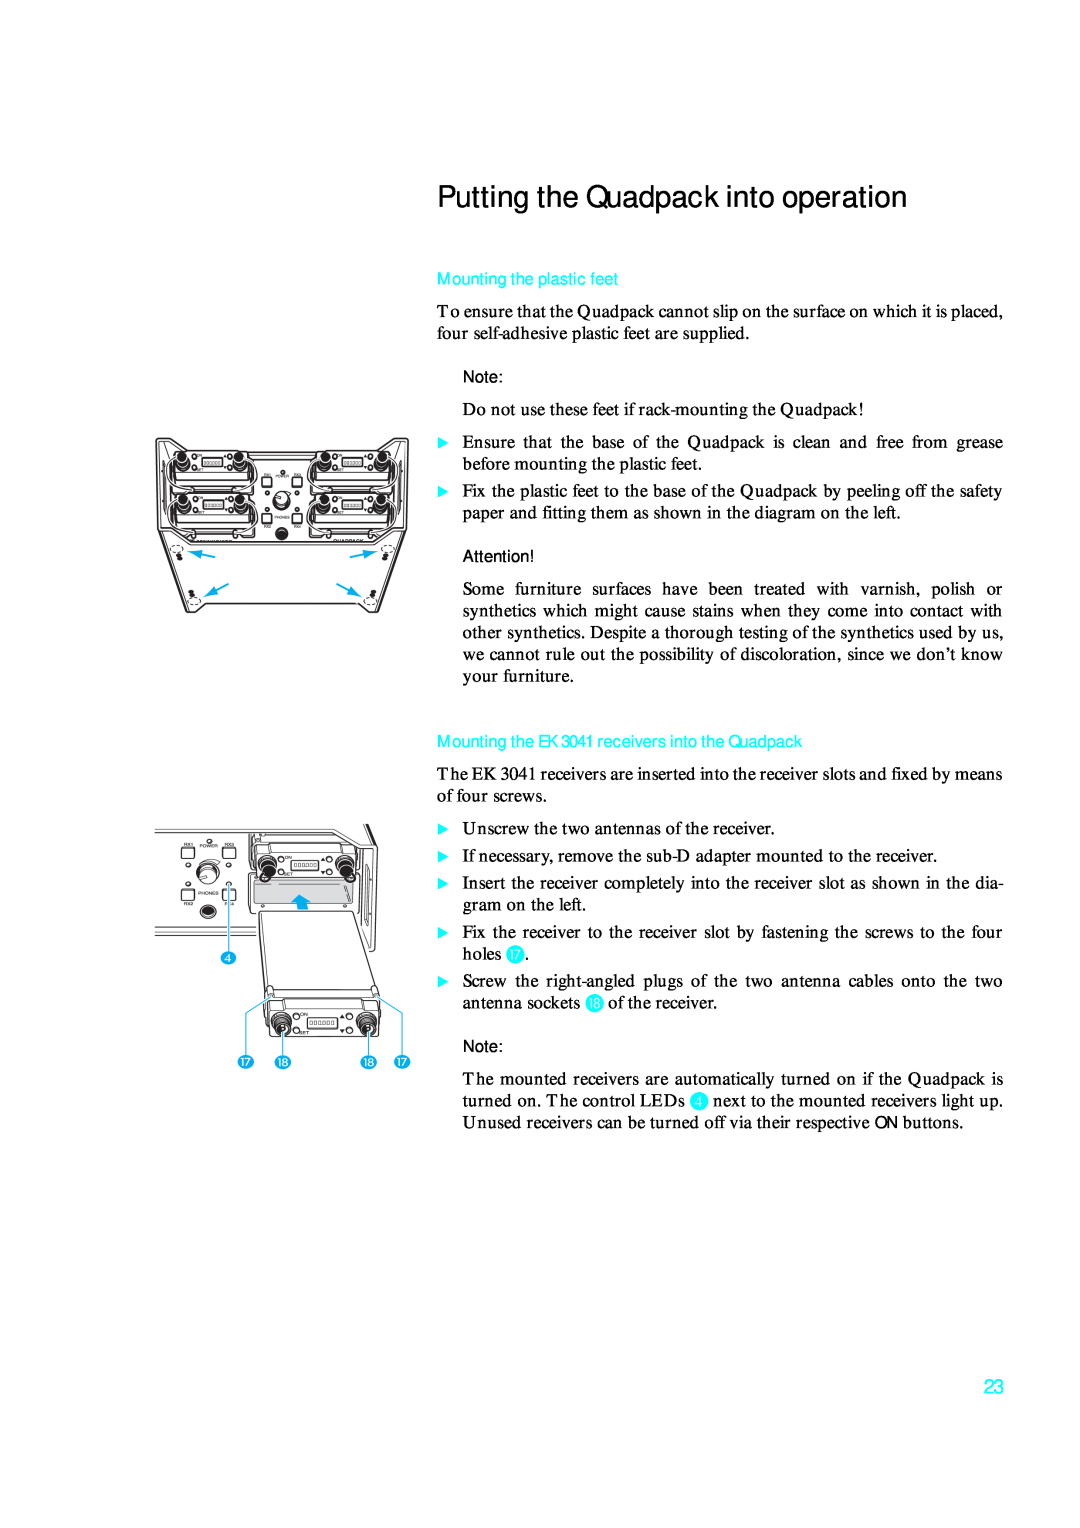 Sennheiser qp 3041 instruction manual Putting the Quadpack into operation, Mounting the plastic feet 